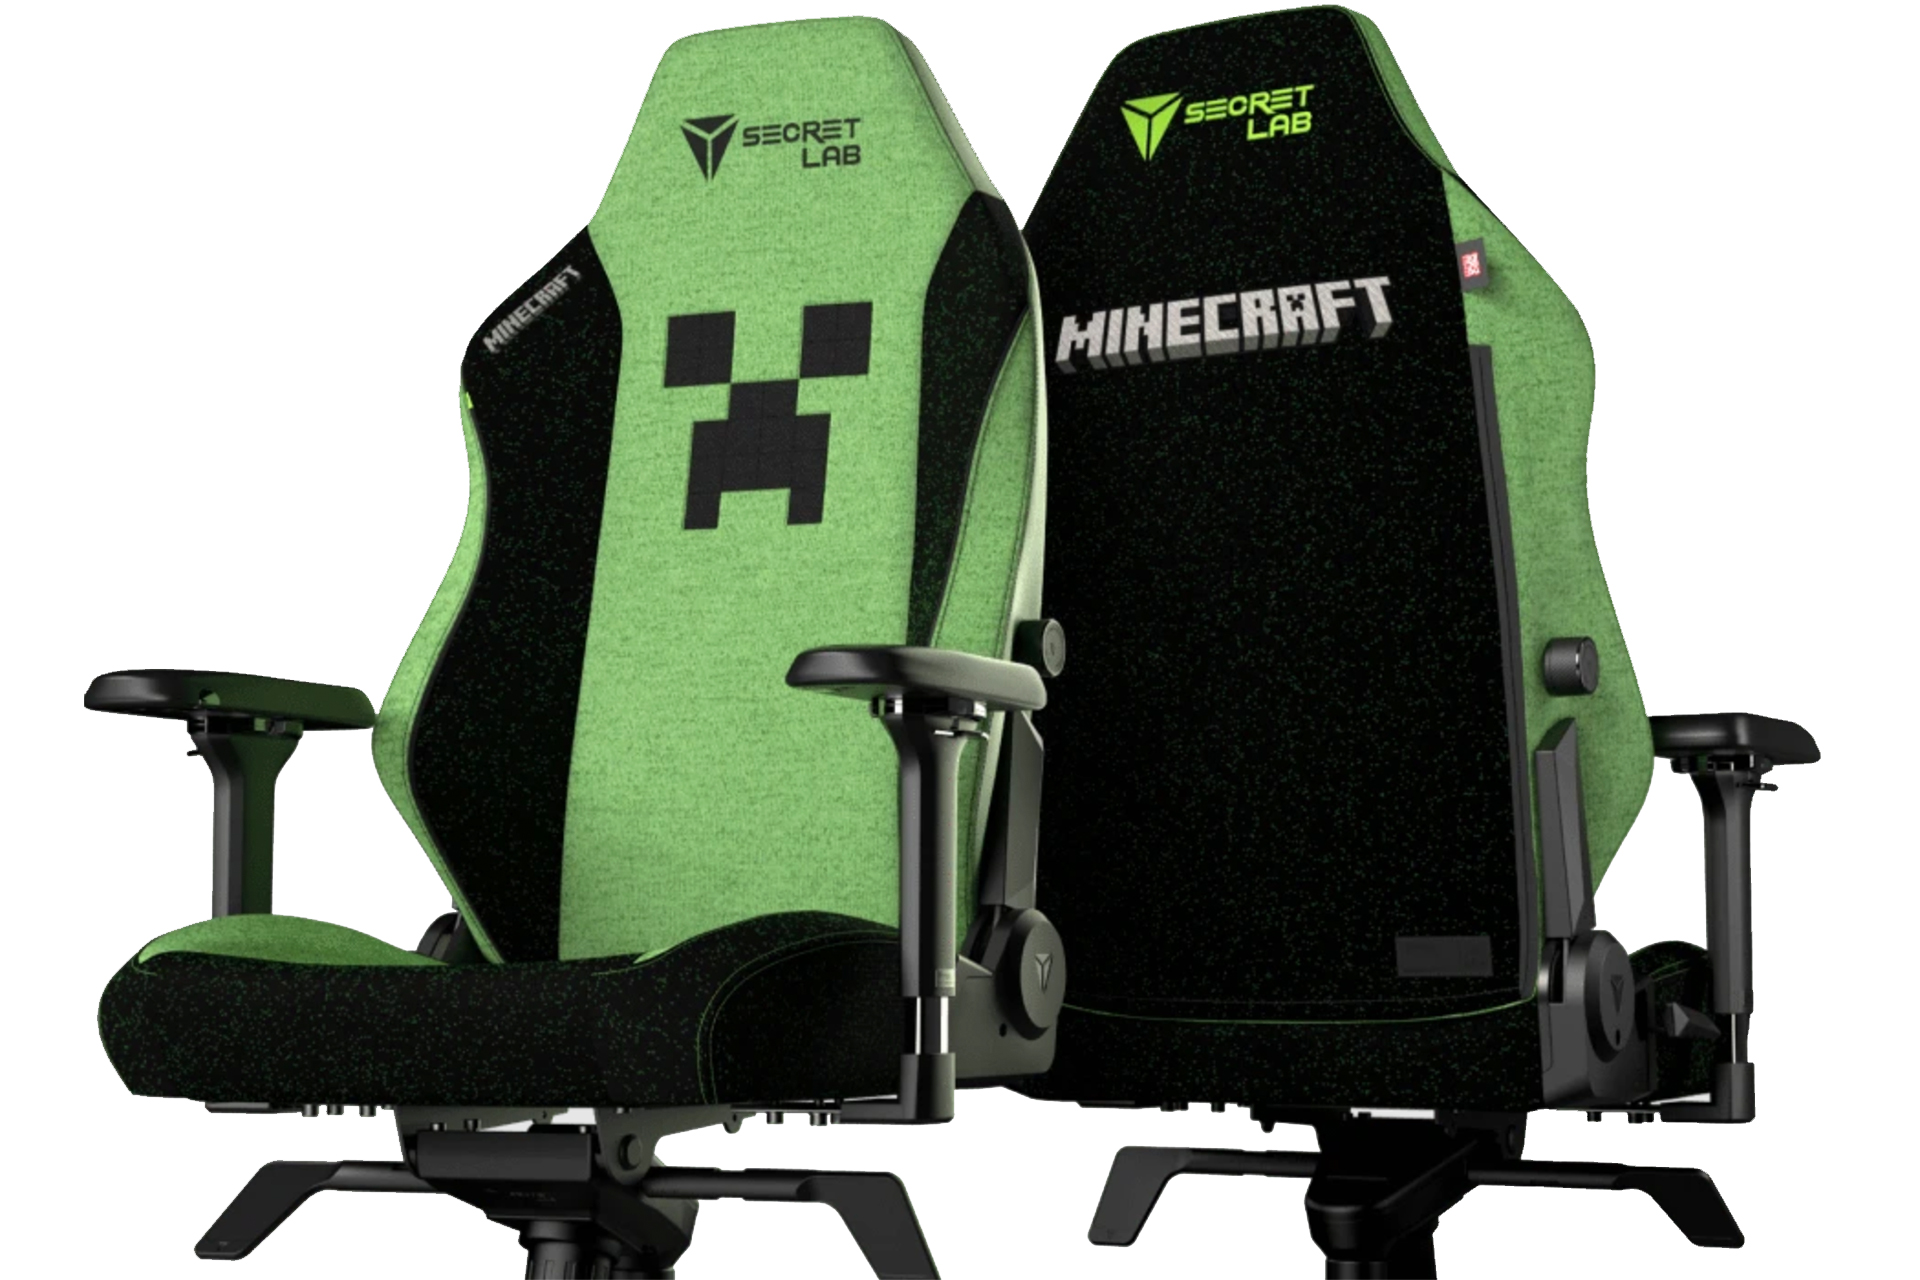 There is now an real ‘Minecraft’ gaming chair